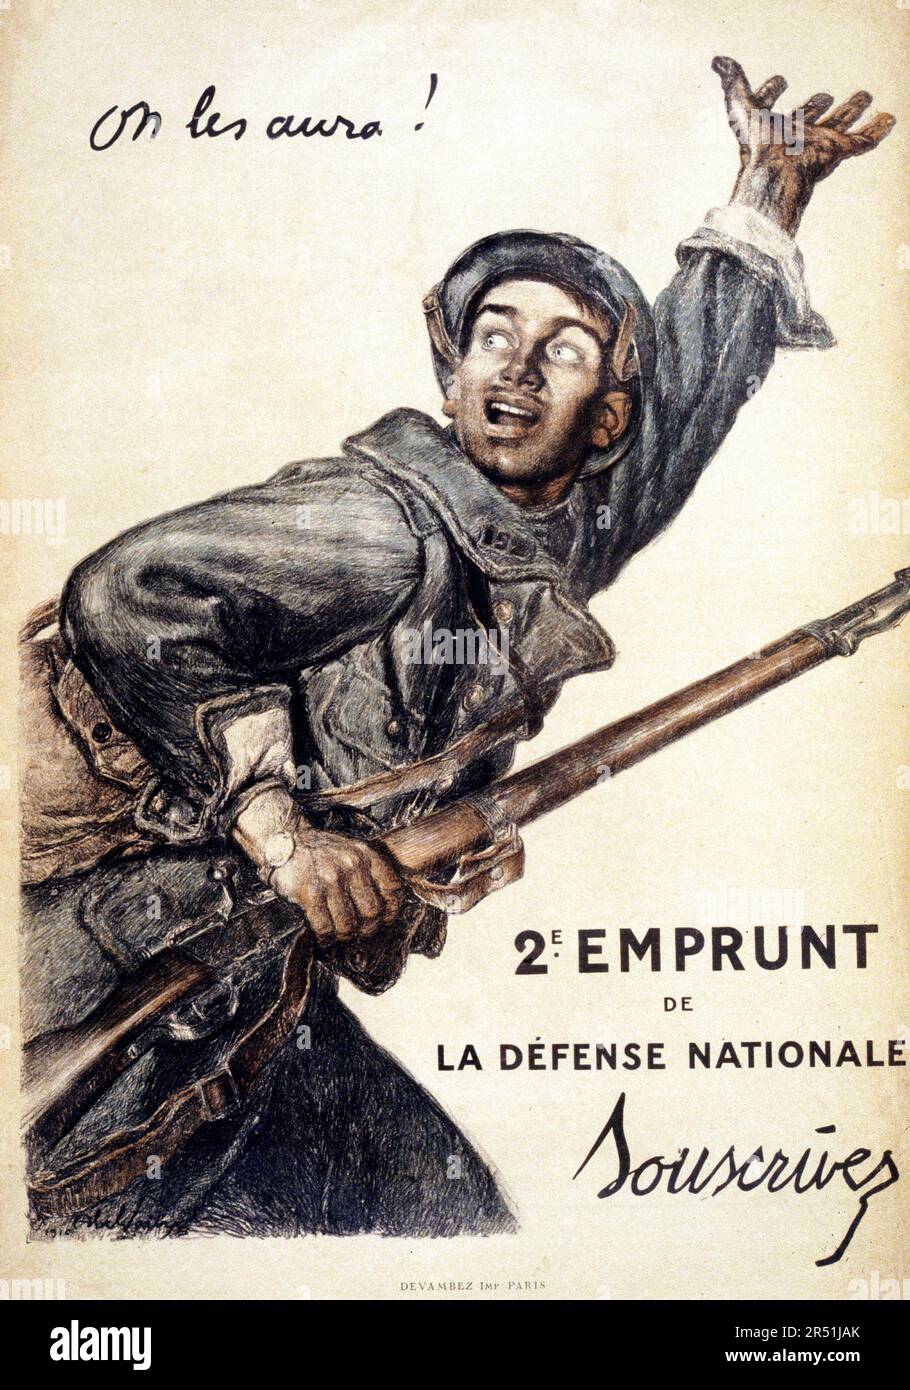 World War I propganda - On les aura! 2e Emprunt de la Défense Nationale. Souscrivez - A French soldier with gun in one hand, and the other raised urging his comrades on. Famous poster by Faivre, Abel, 1867-1945 Stock Photo